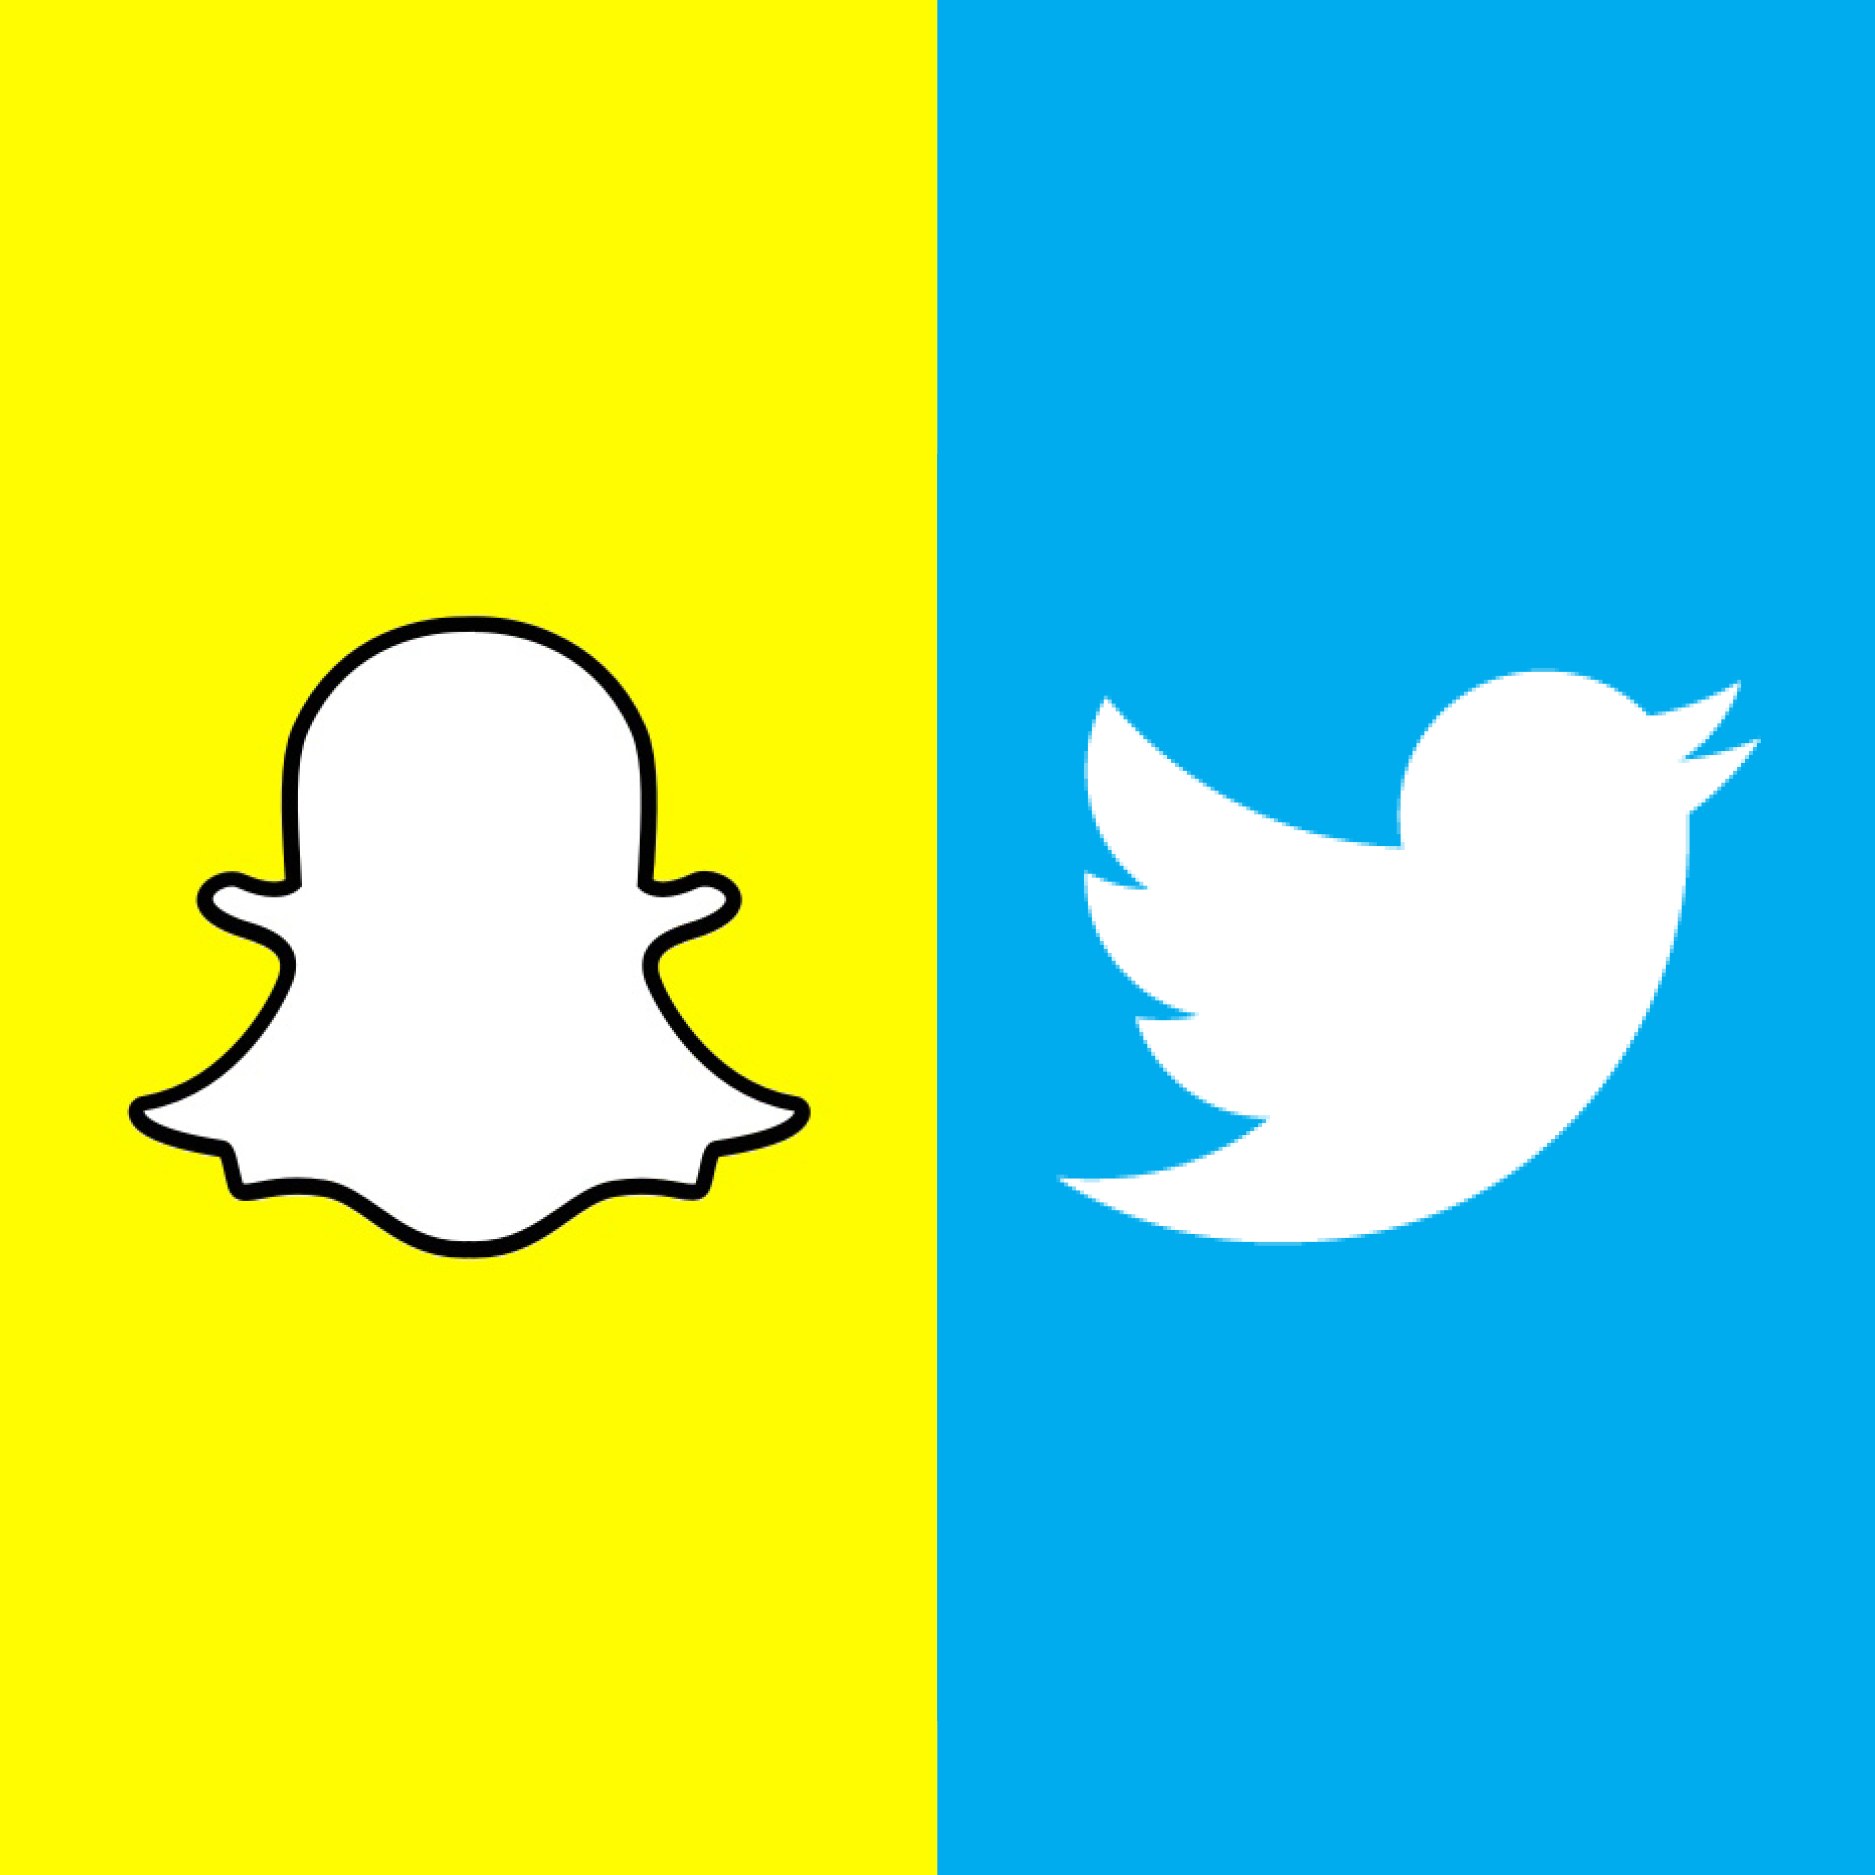 Cover image for Has Snapchat Learned From Twitter’s IPO?